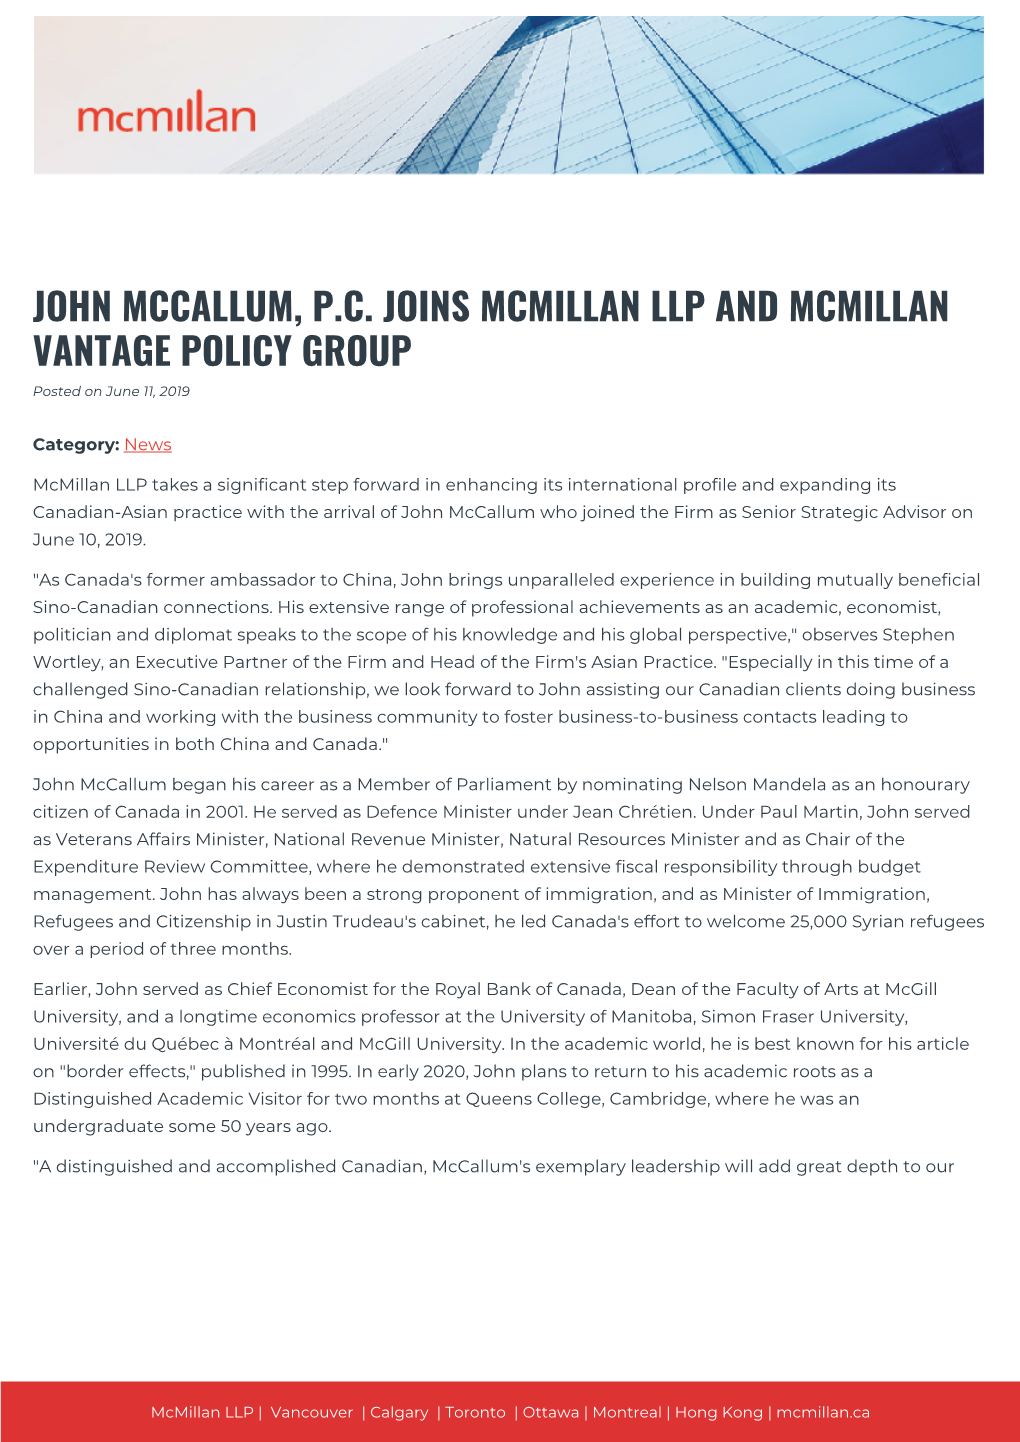 JOHN MCCALLUM, P.C. JOINS MCMILLAN LLP and MCMILLAN VANTAGE POLICY GROUP Posted on June 11, 2019